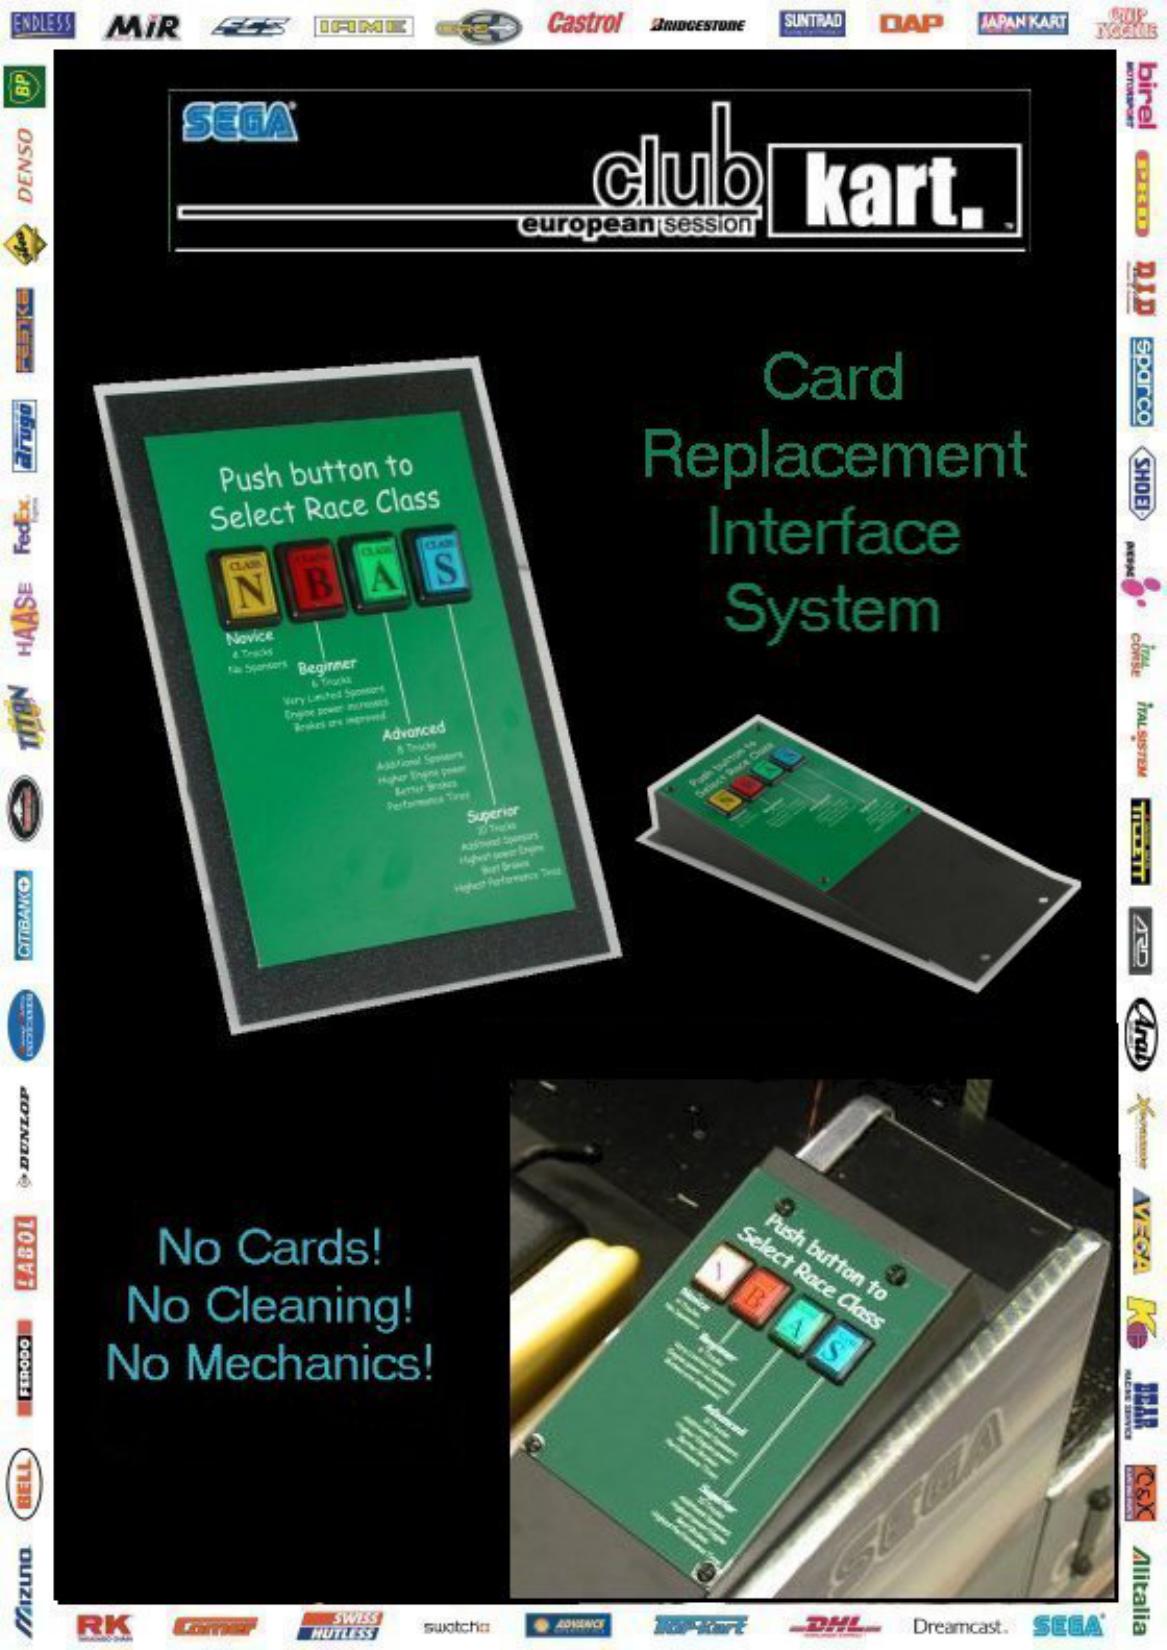 Club Kart (Card Replacement Interface System) Brochure